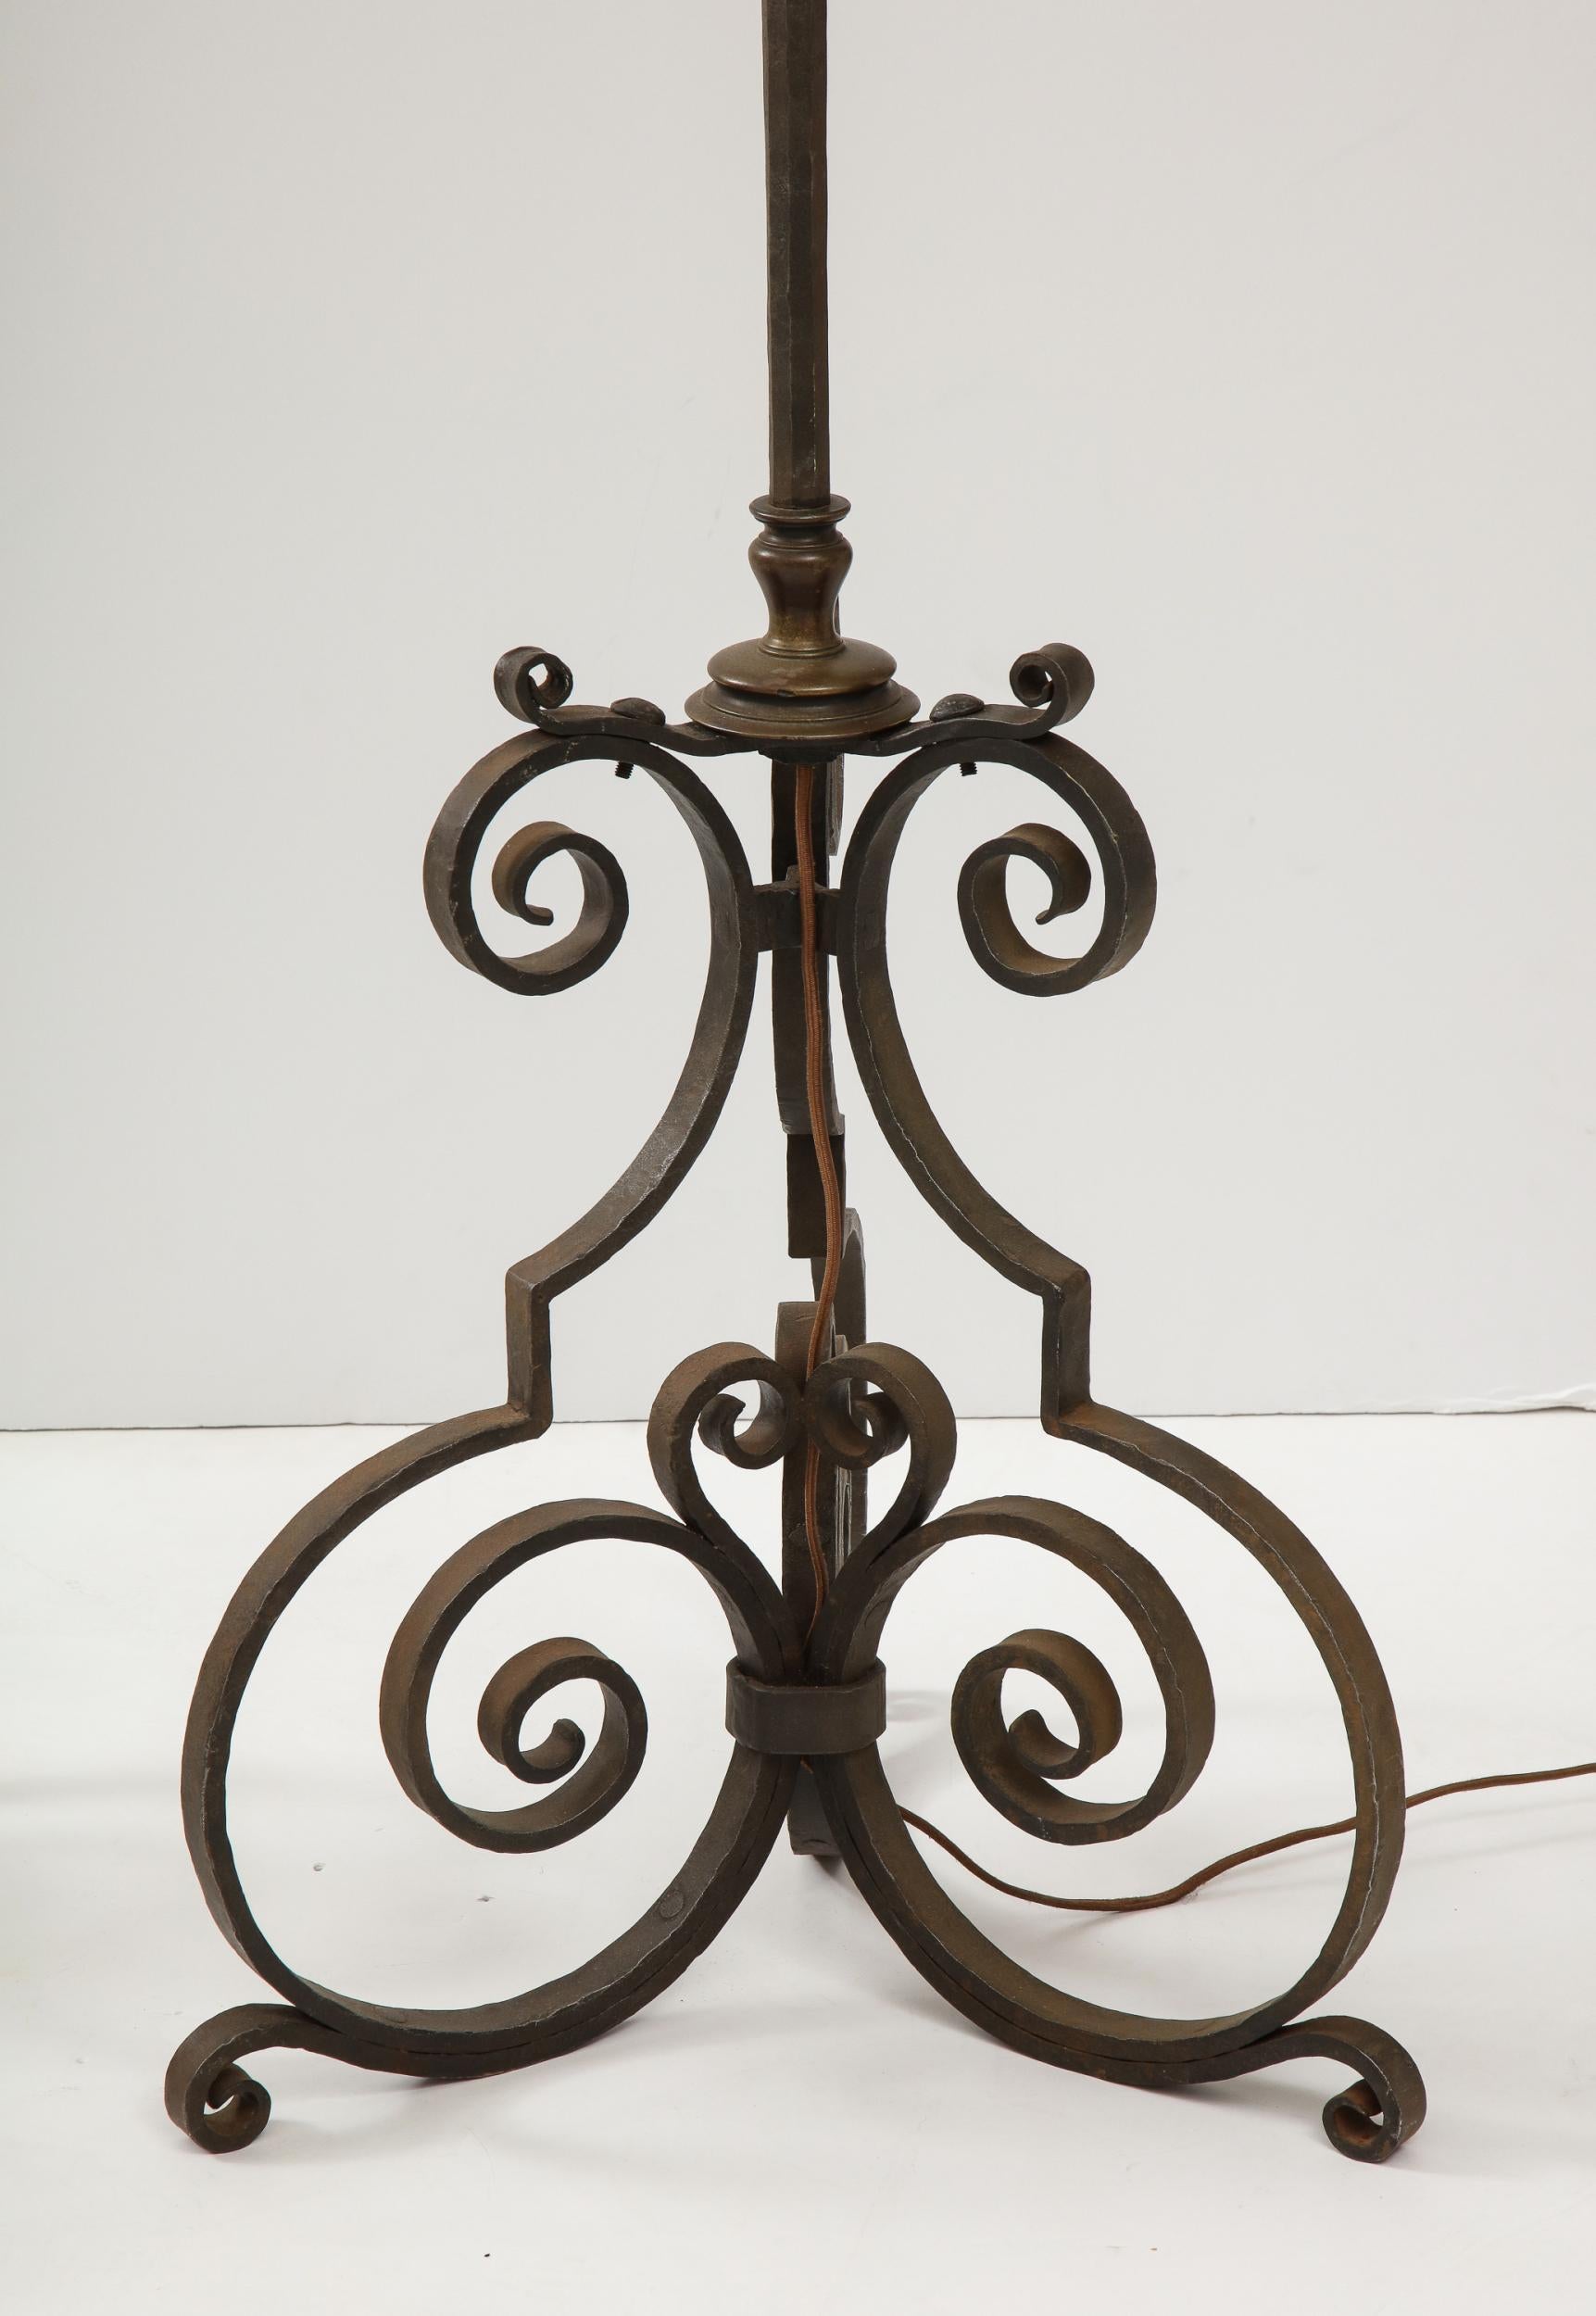 Hammered Pair of Wrought Iron and Brass Floor Lamps